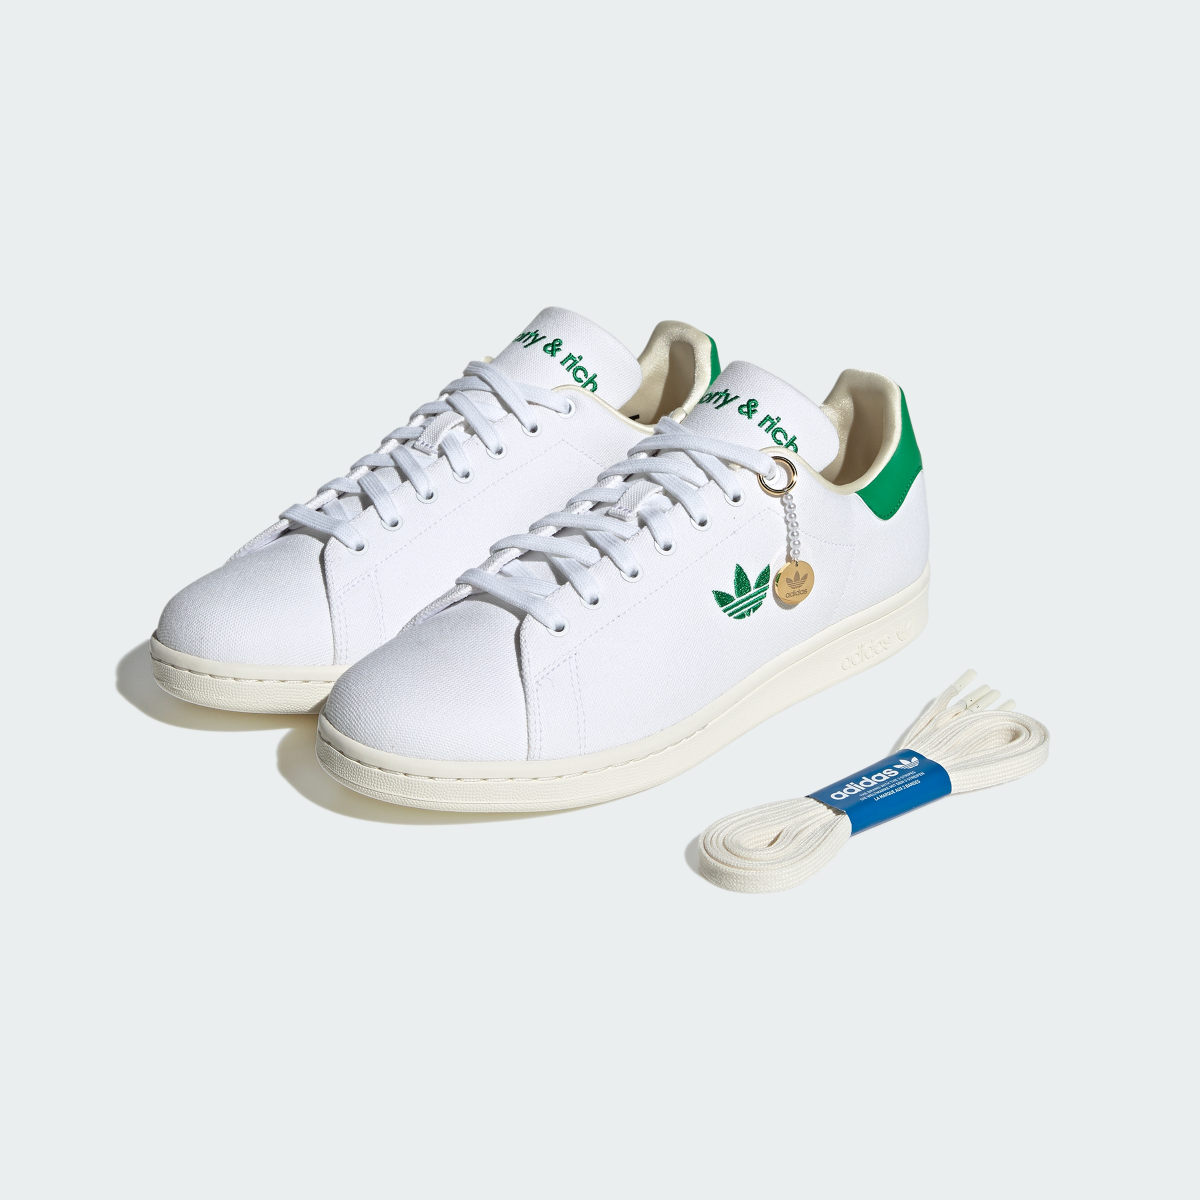 Adidas Stan Smith Sporty & Rich Shoes. 10